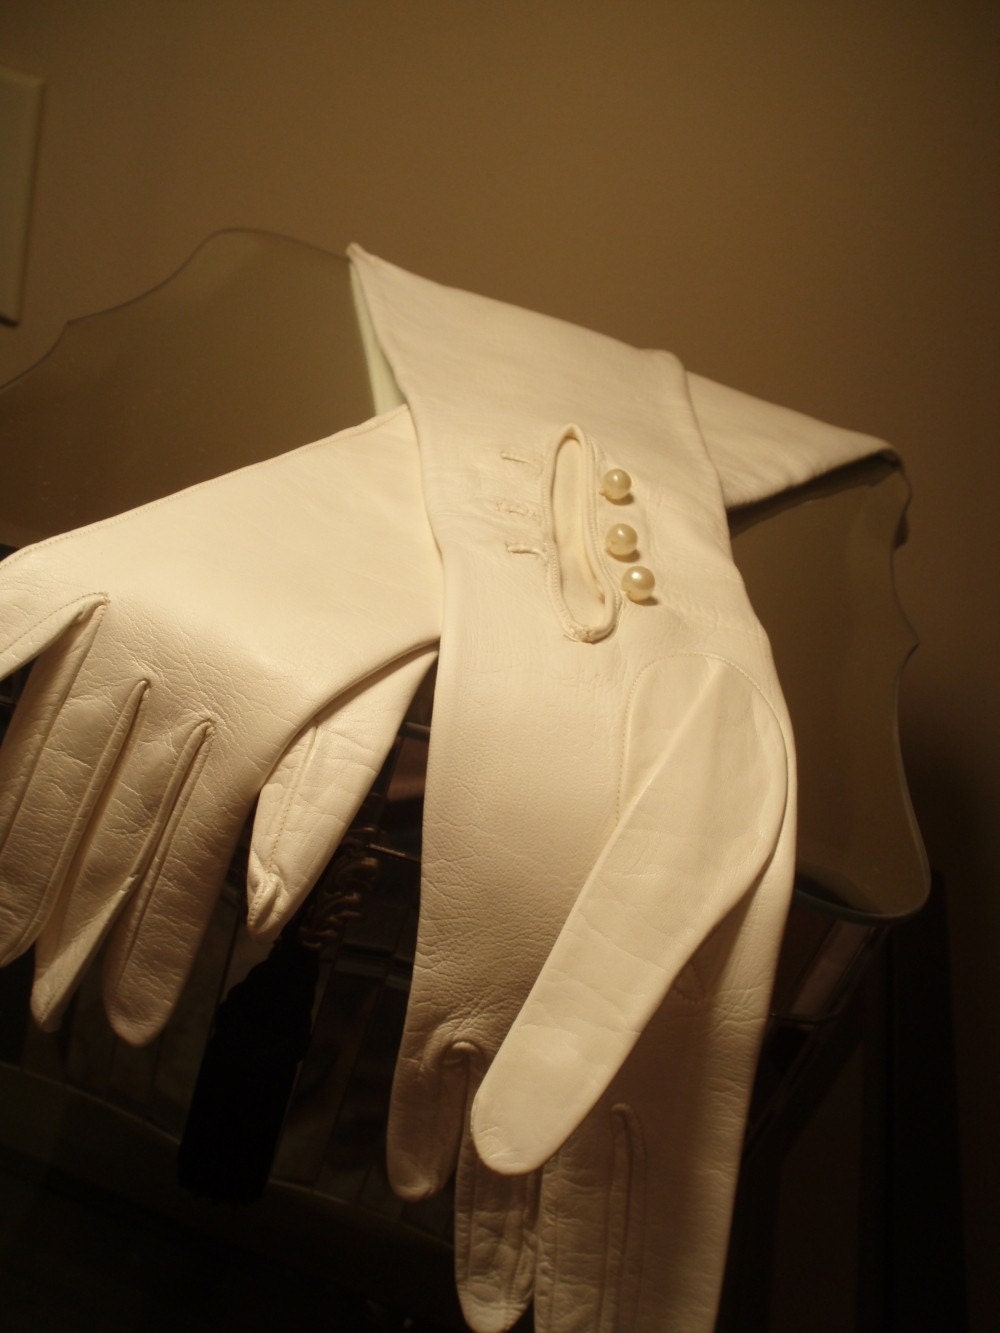 Amazingly Beautiful Antique Leather Gloves for The Bride